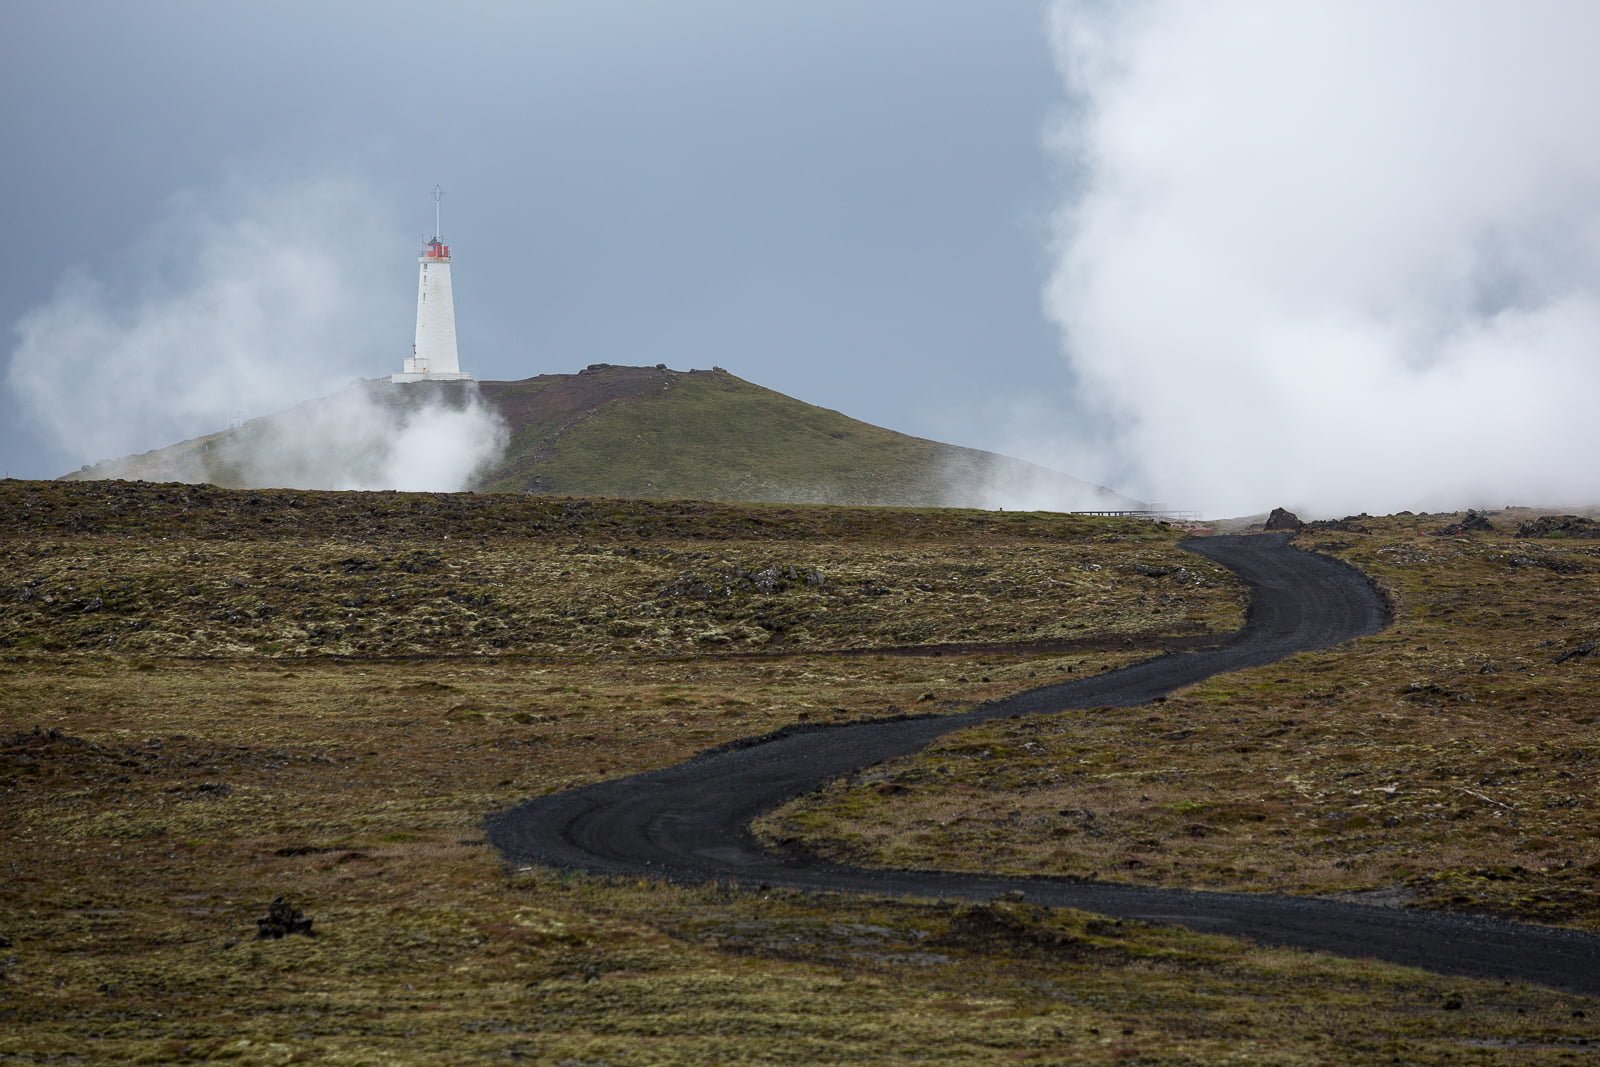 More than 50/50 chance of a volcano, most Icelanders are not worried